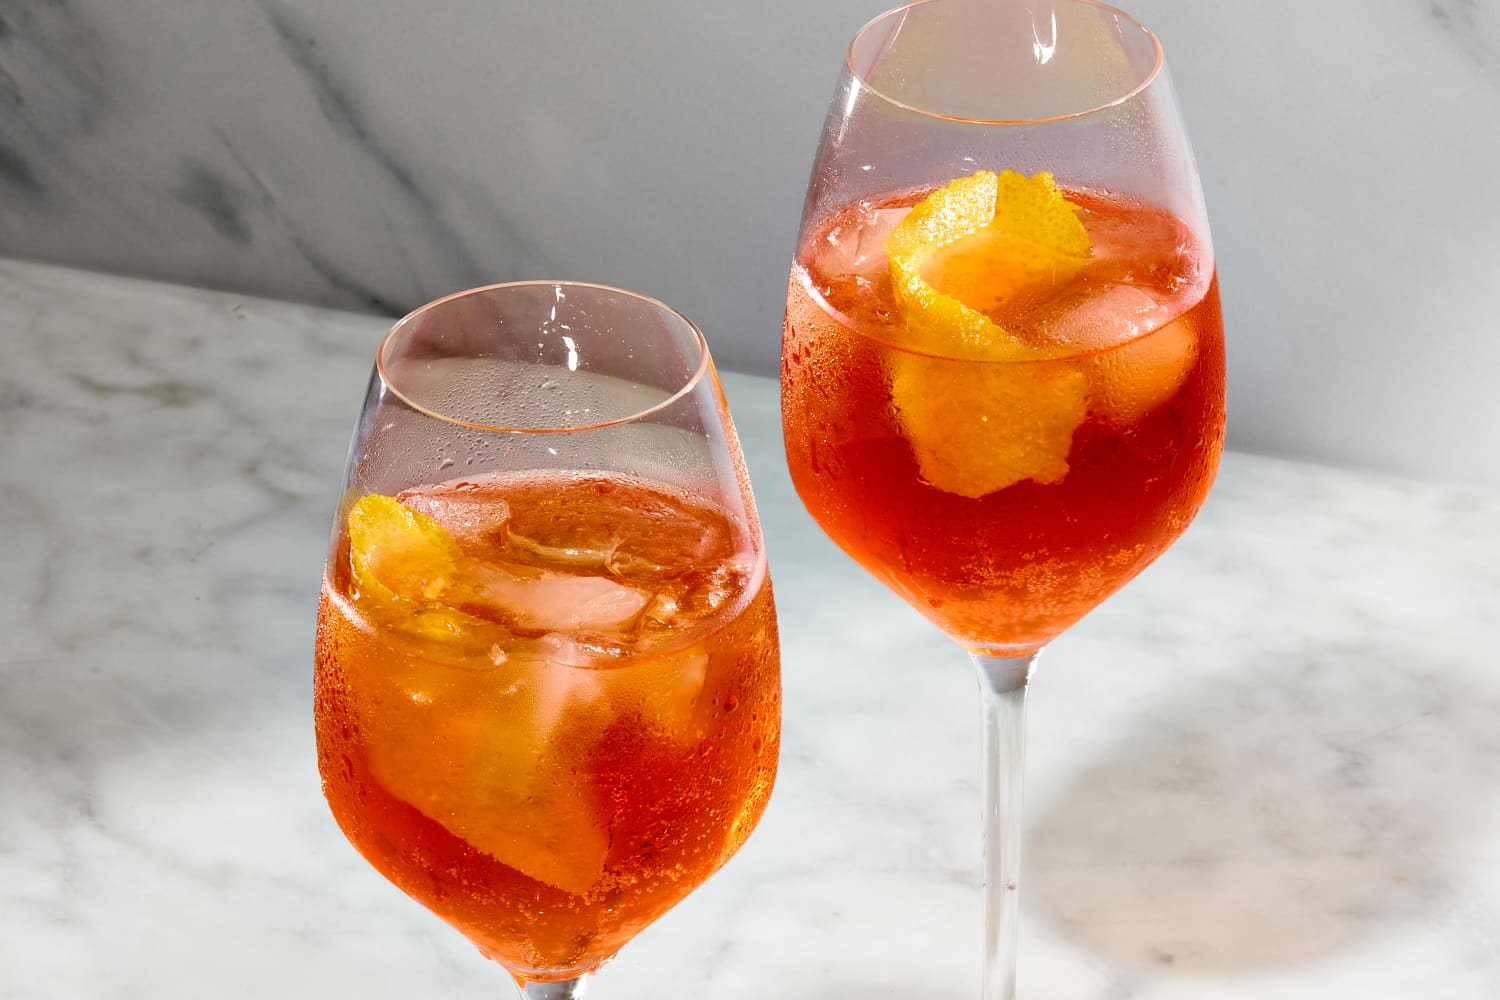 10 Delicious Spritz Cocktail Recipes That Go Way Beyond Aperol (They're So Refreshing!)